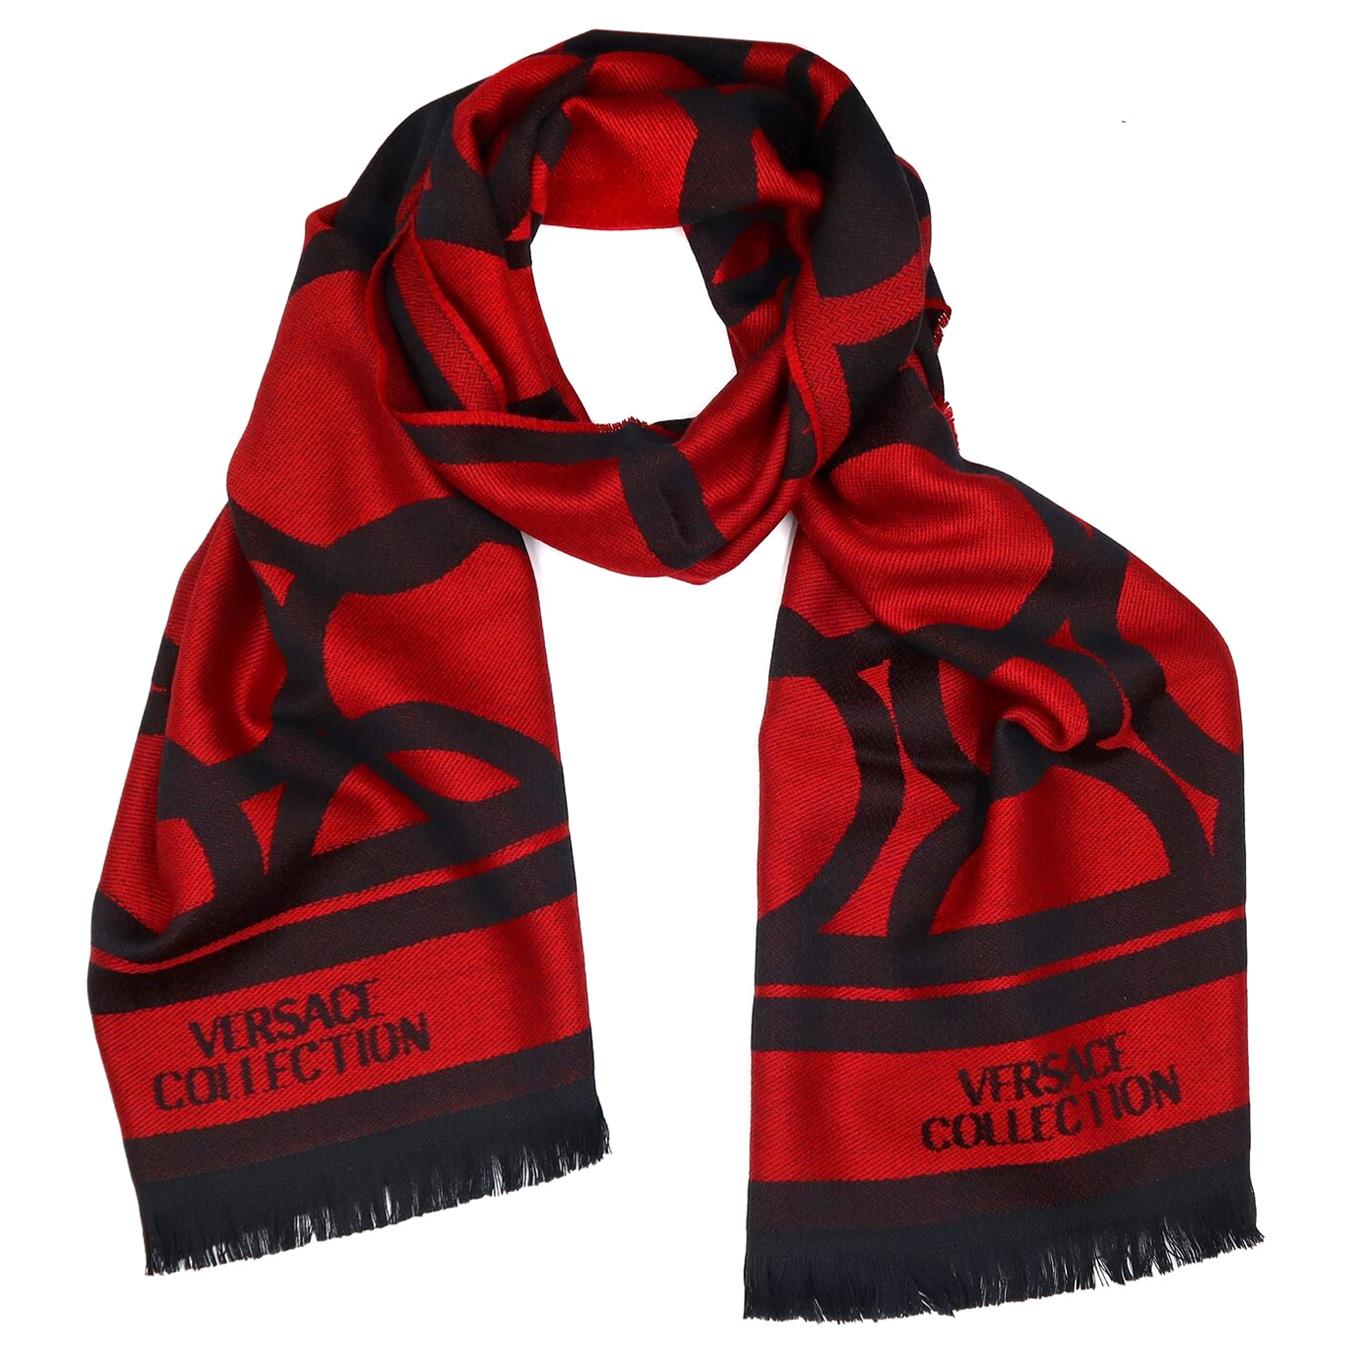 Versace Collection Black & Red Mens Scarf ISC40R1WIT02855I4081